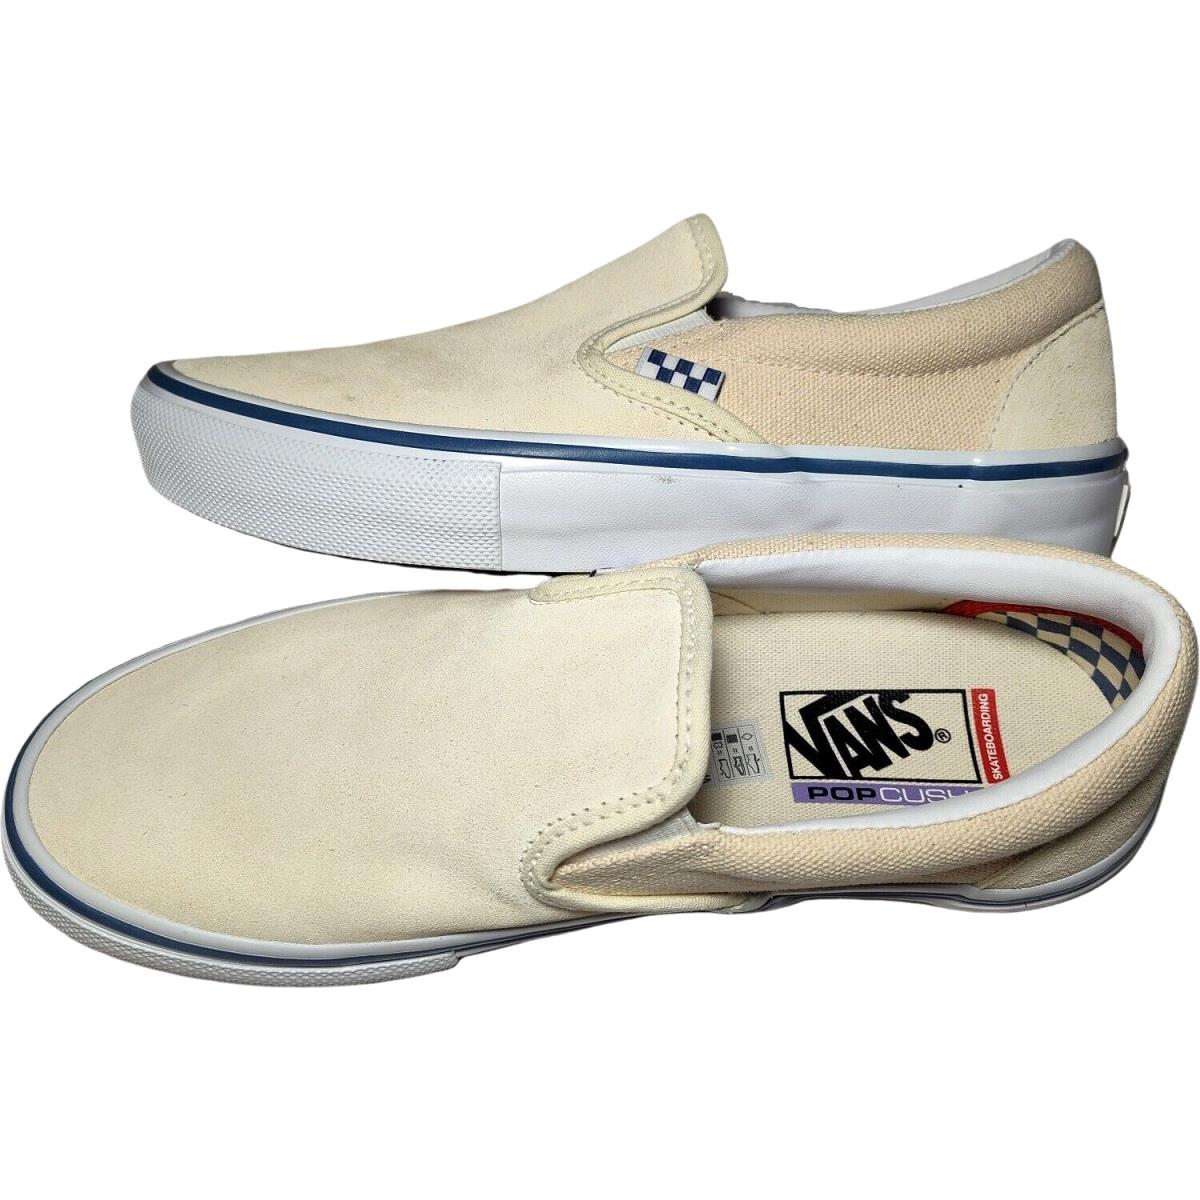 Vans Classic Slip On Skate Shoes 7.5 Mens Classic White Raw Canvas